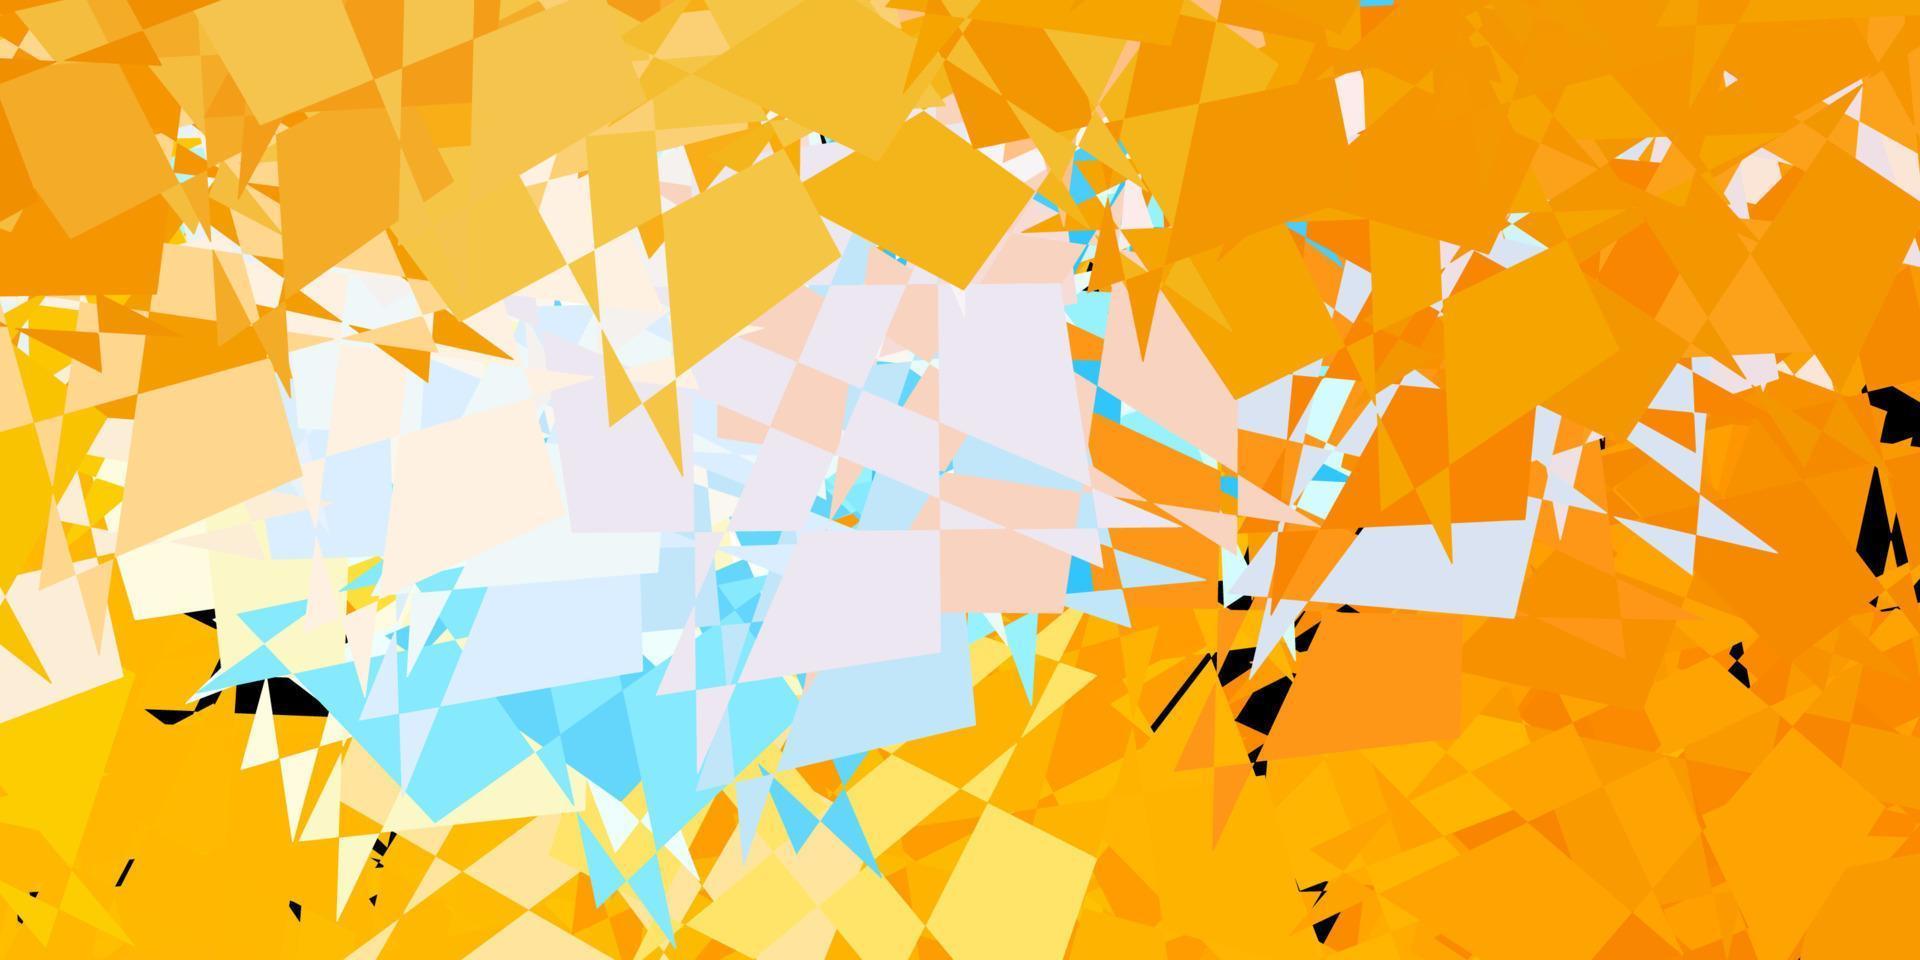 Light blue, yellow vector texture with memphis shapes.